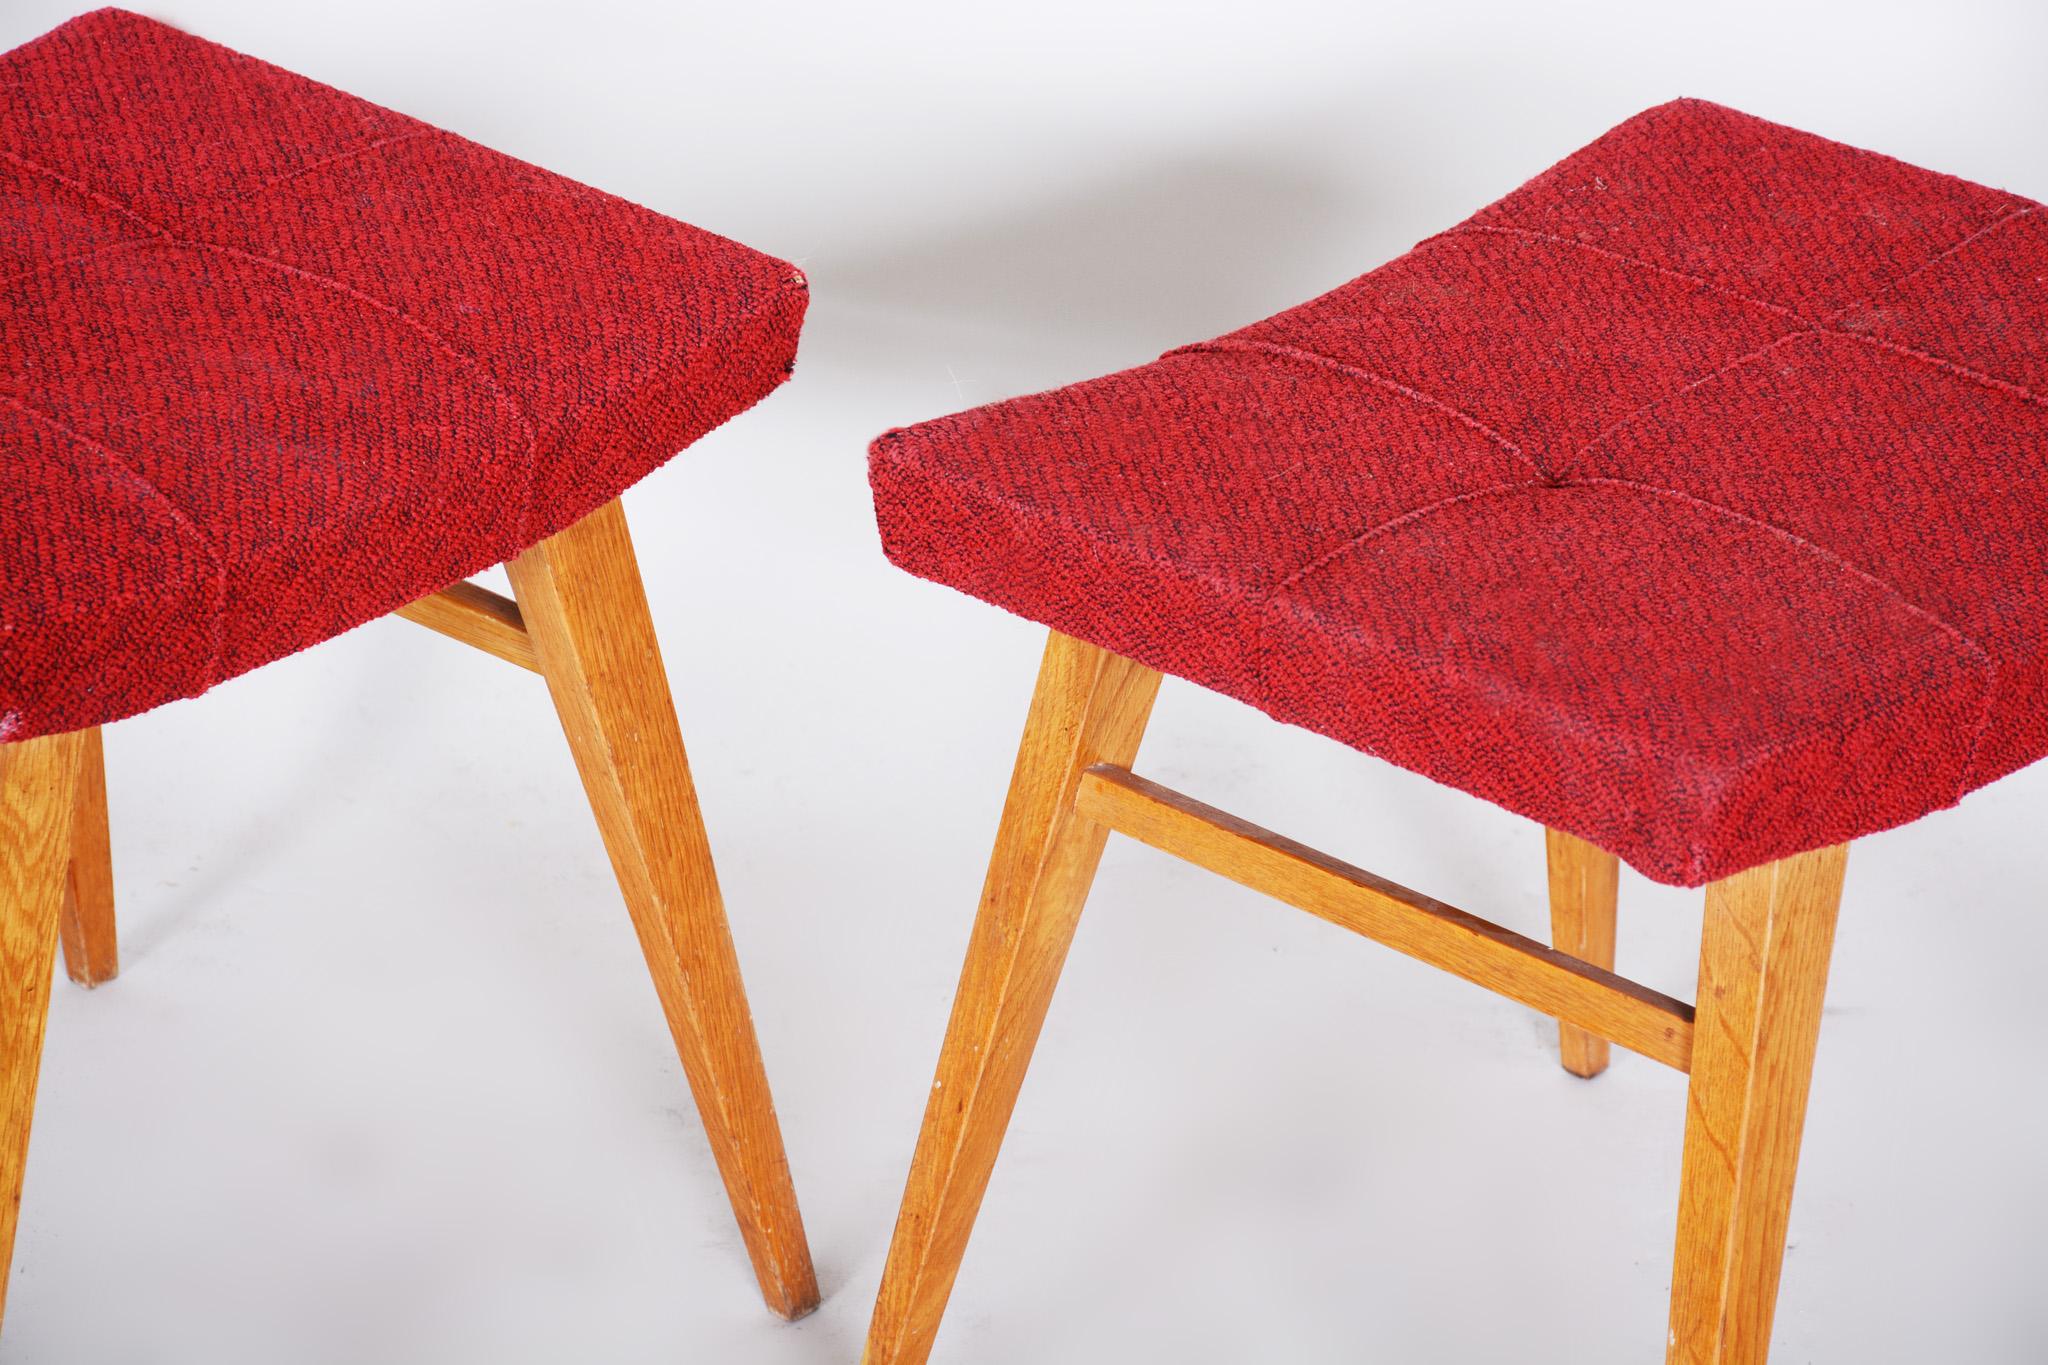 Pair of Midcentury Red Beech Stools, 1960s, Original Preserved Condition In Fair Condition For Sale In Horomerice, CZ